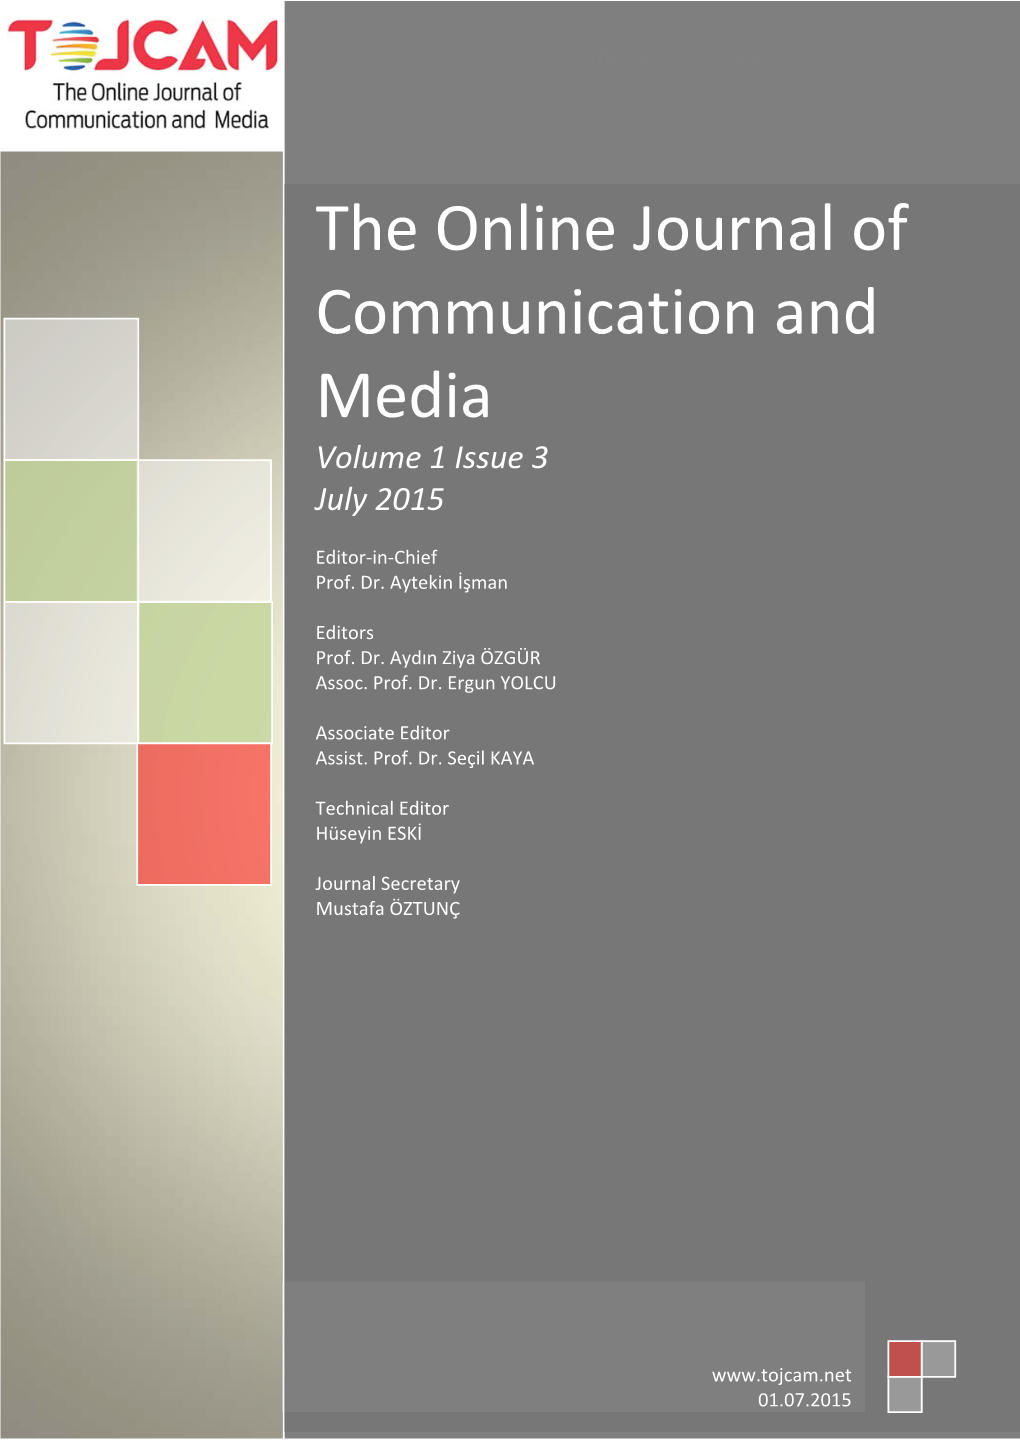 The Online Journal of Communication and Media Volume 1 Issue 3 July 2015